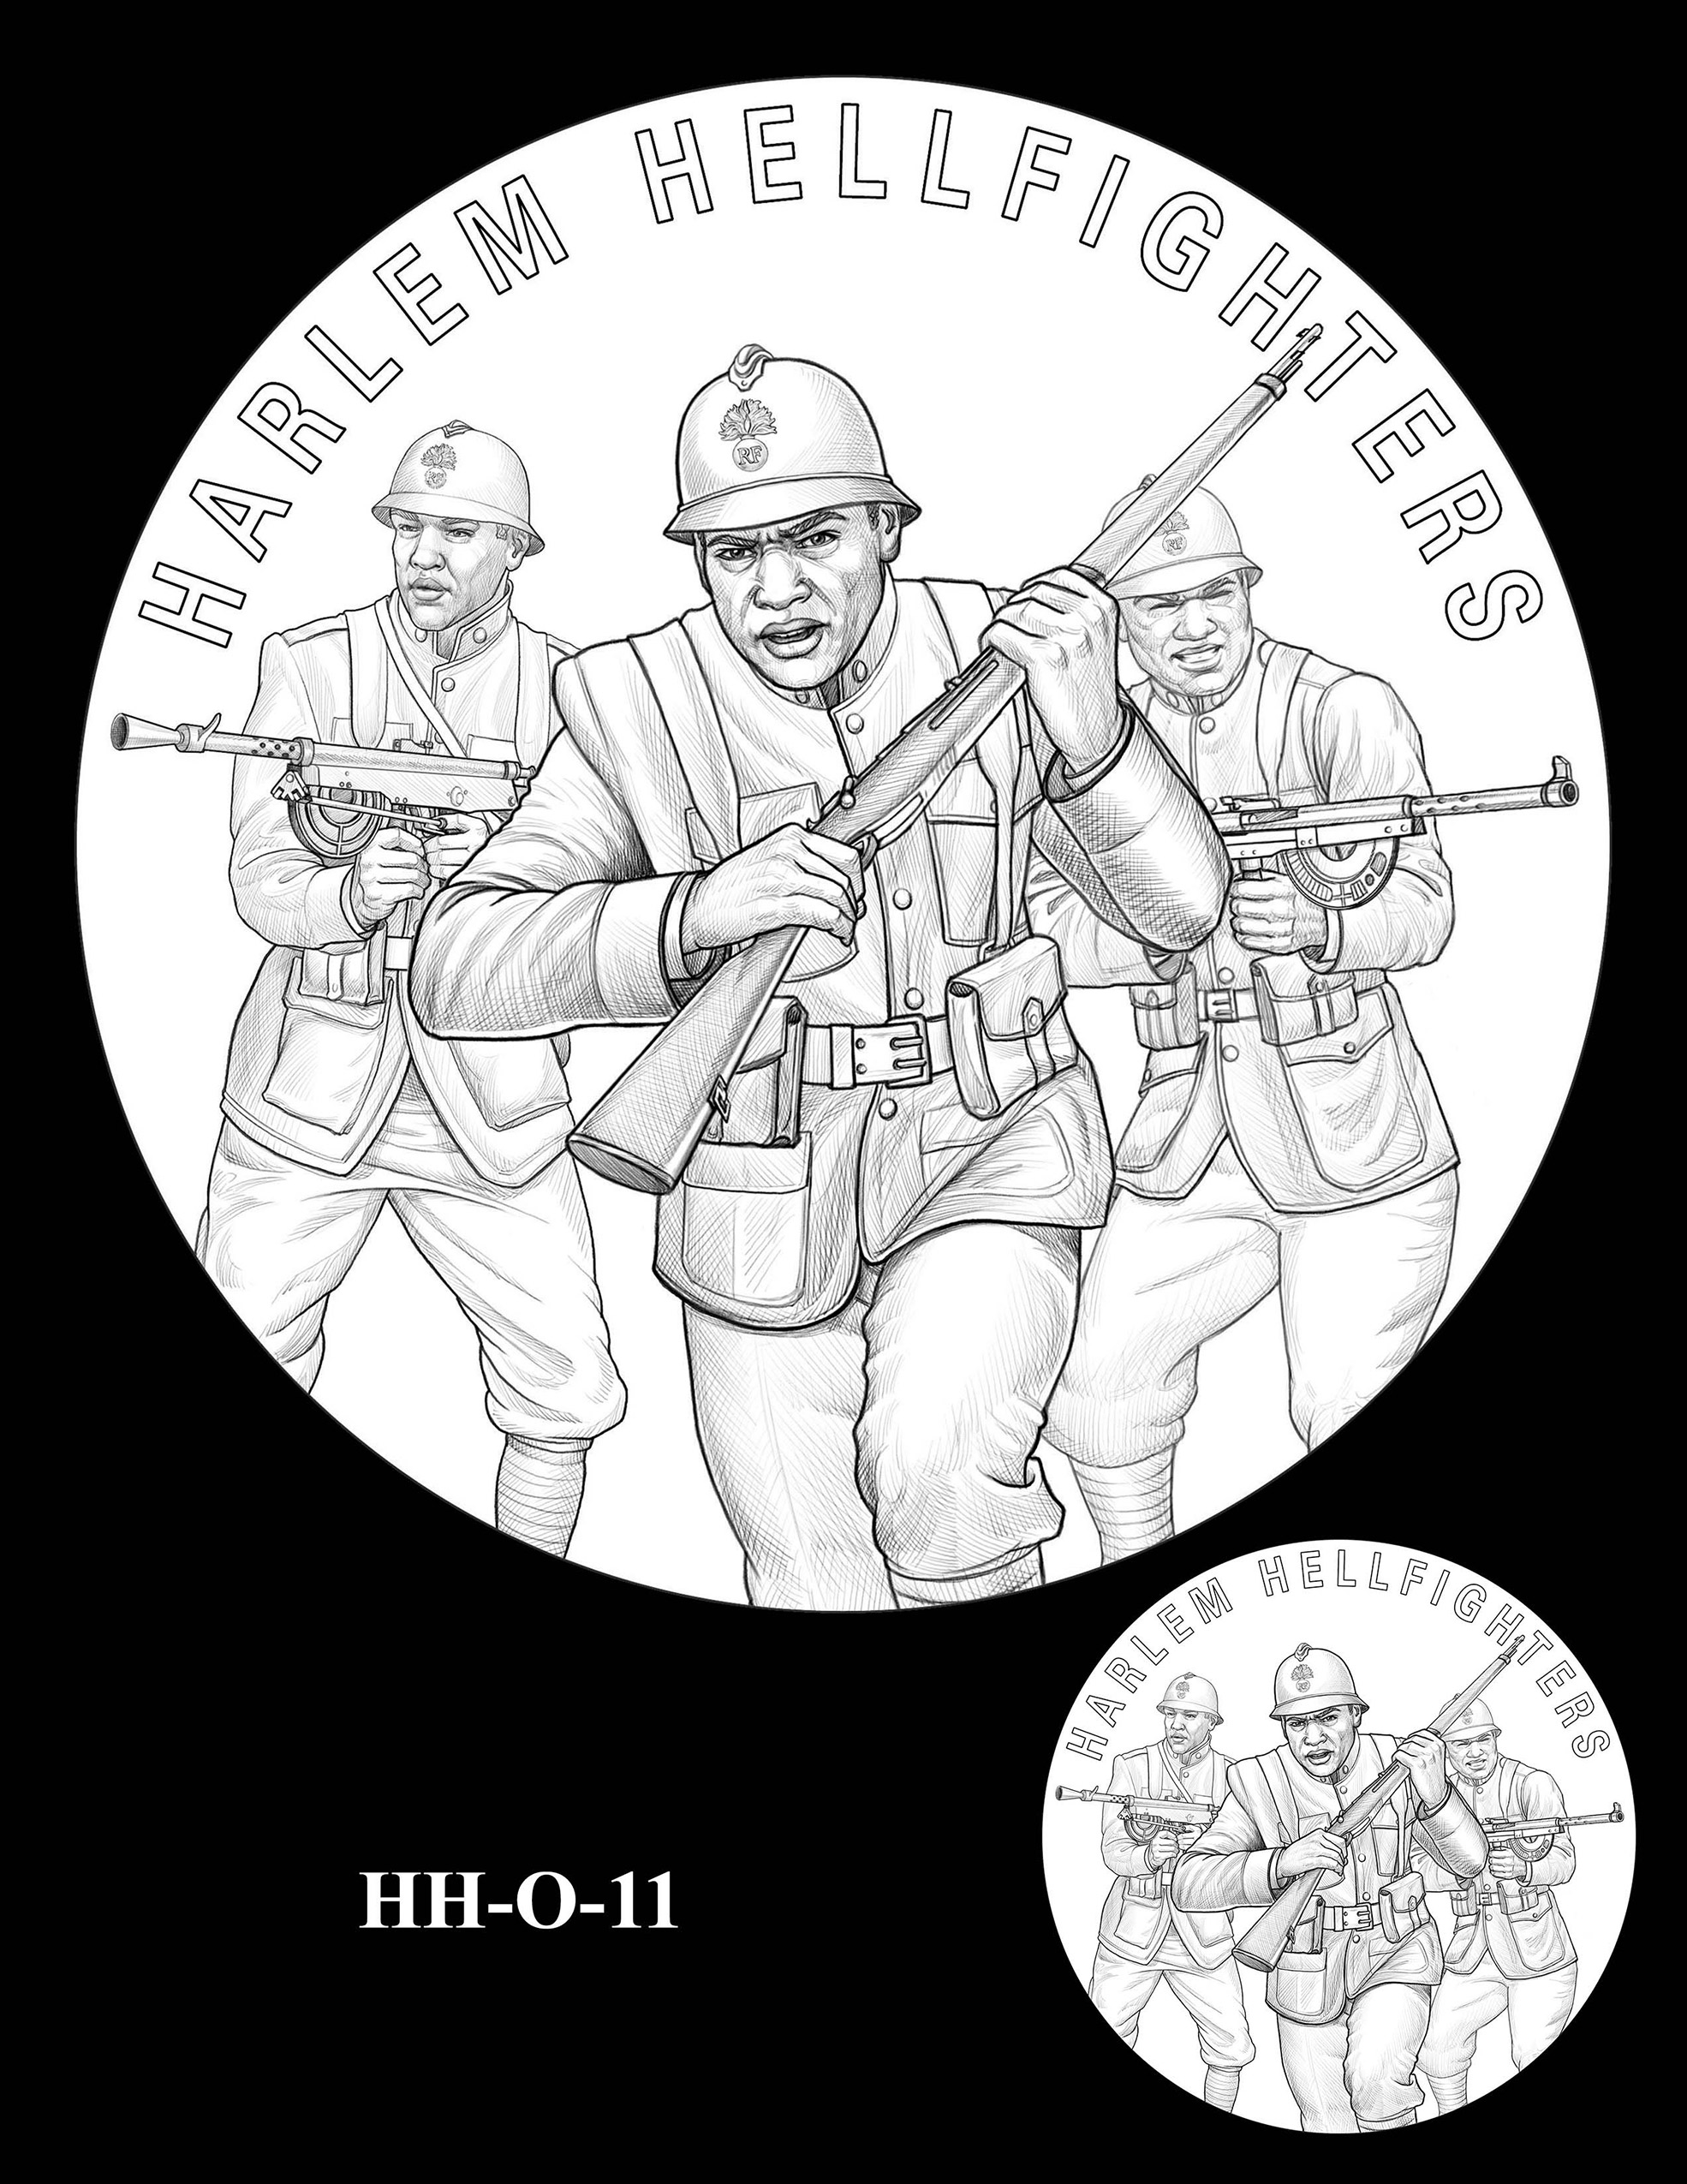 HH-O-11 -- Harlem Hellfighters Congressional Gold Medal